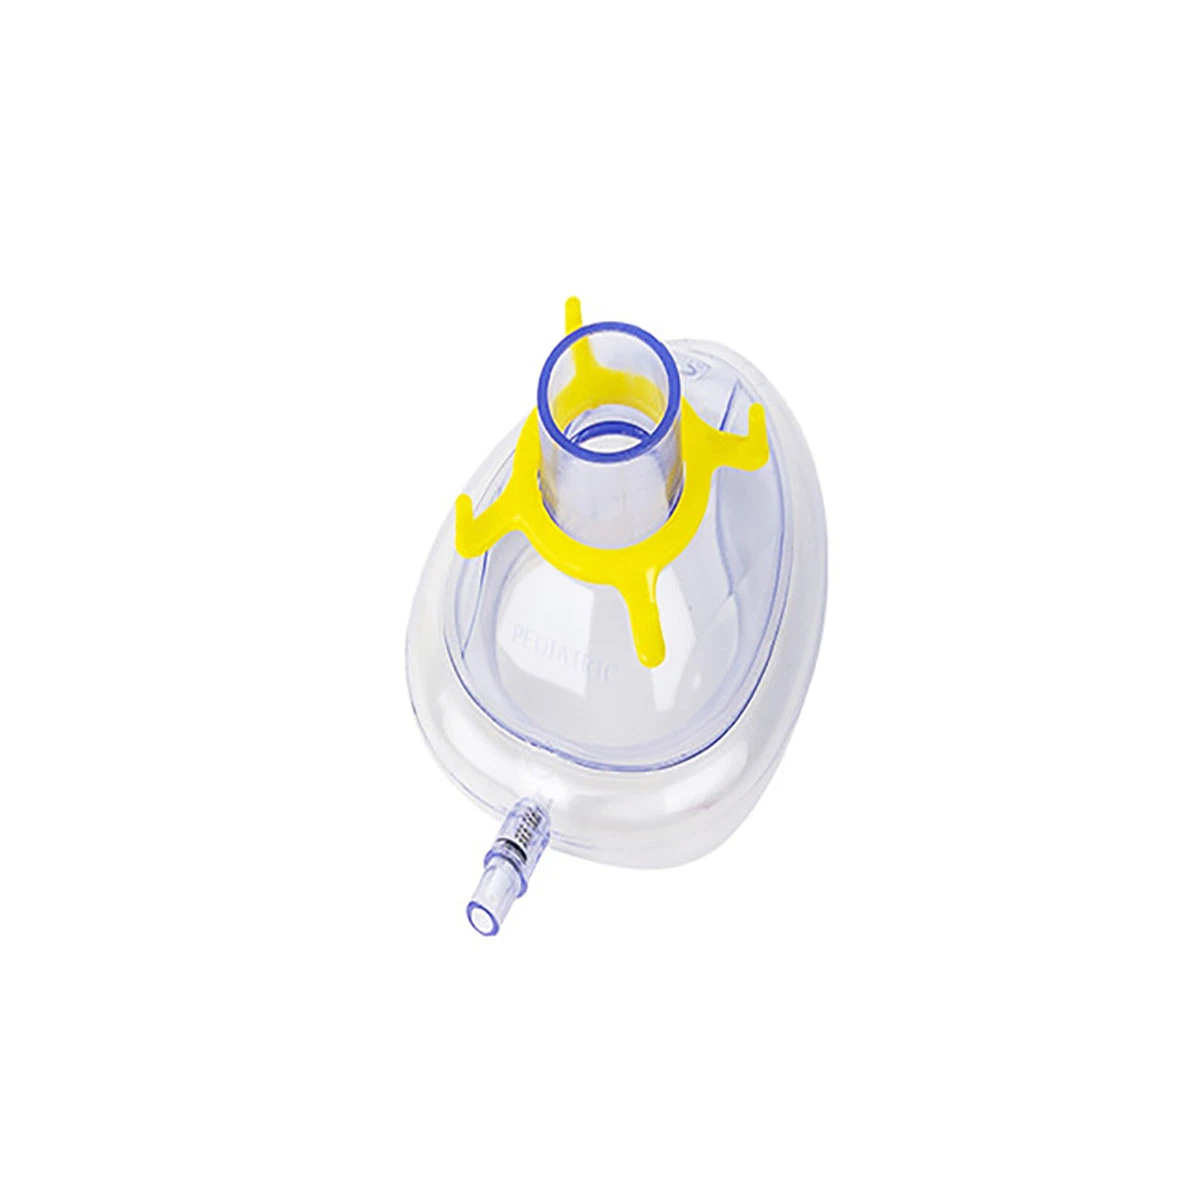 Disposable Medical Grade PVC Anaesthesia/Anaesthetic Mask From Size 0 to Size 6